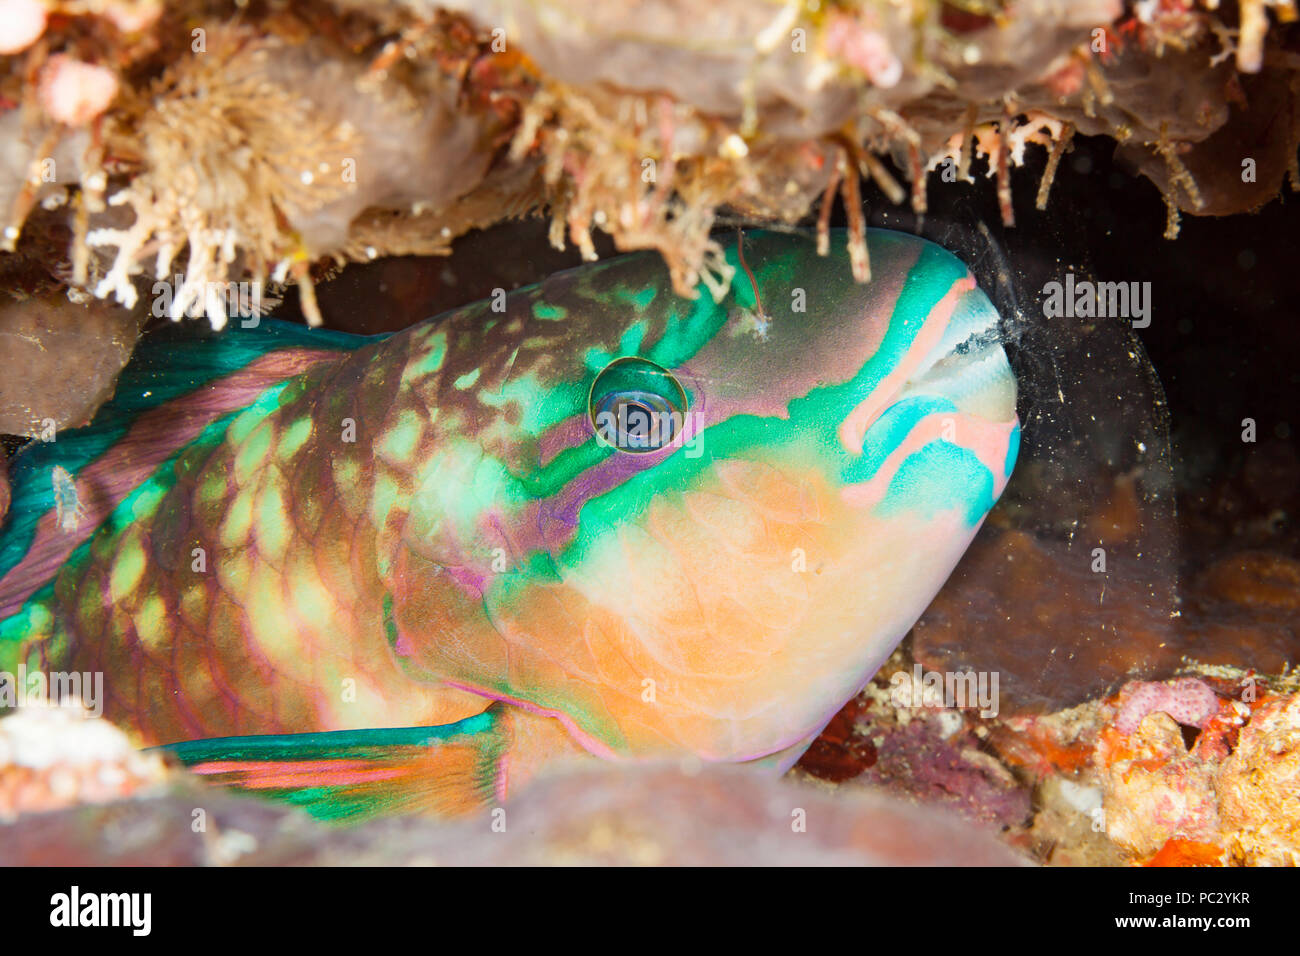 A close look at night of chameleon parrotfish, Scarus chameleon, sleeping in a mucus bubble that is secreted from large glands in the gill cavity and  Stock Photo